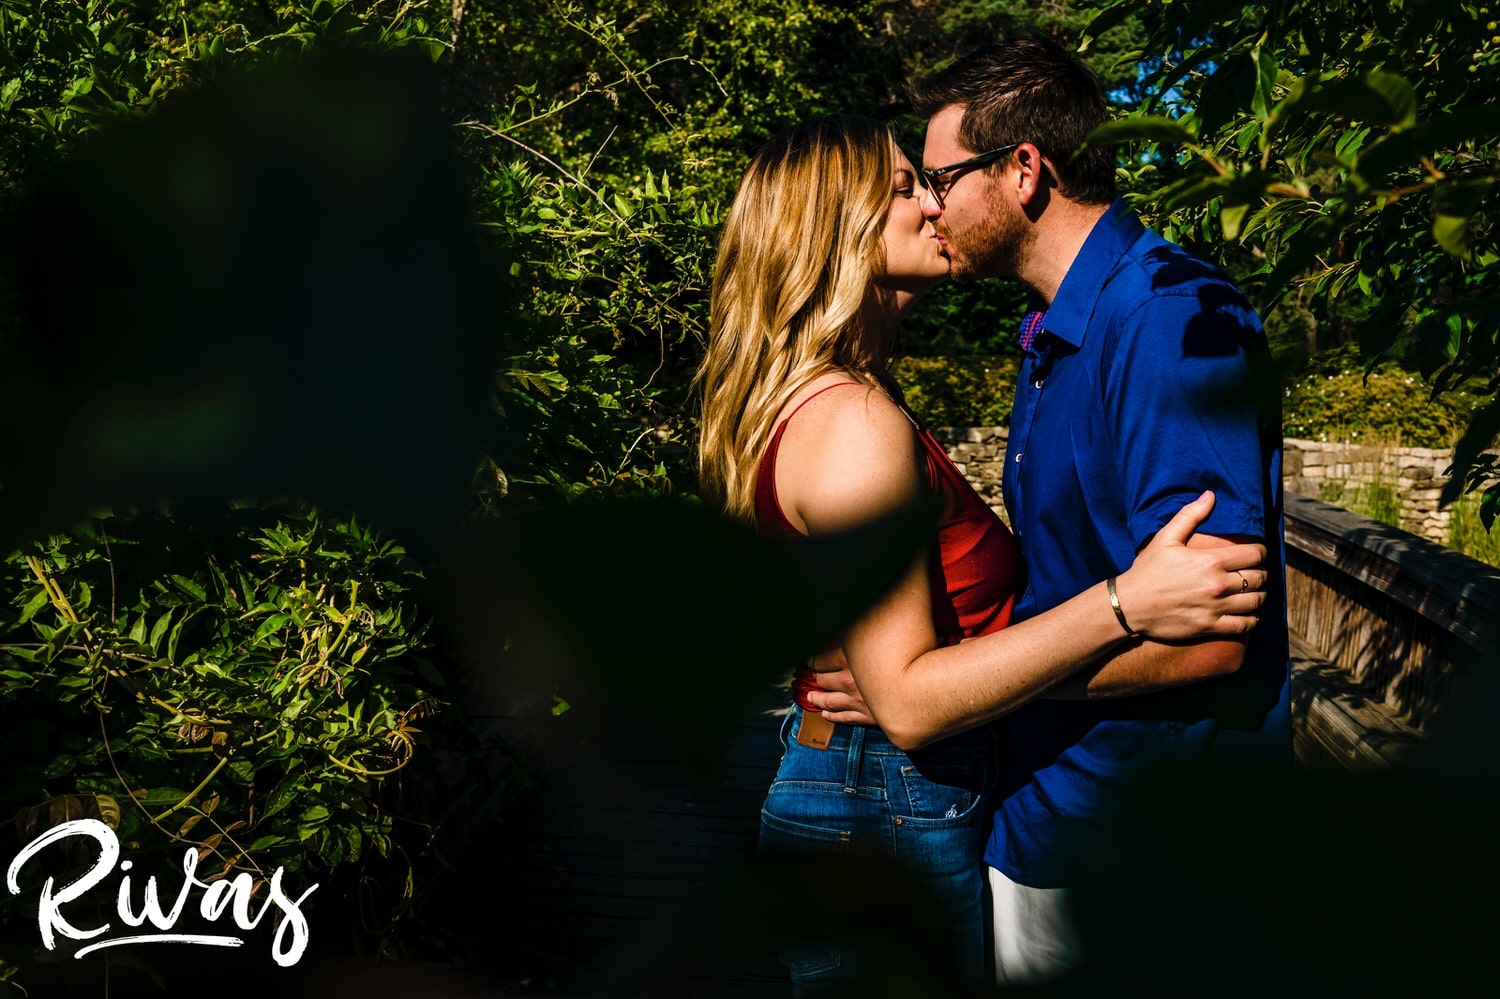 A colorful, intimate portrait of an engaged couple sharing a kiss underneath a canopy of bright green leaves during their engagement session with their wedding photographer. 